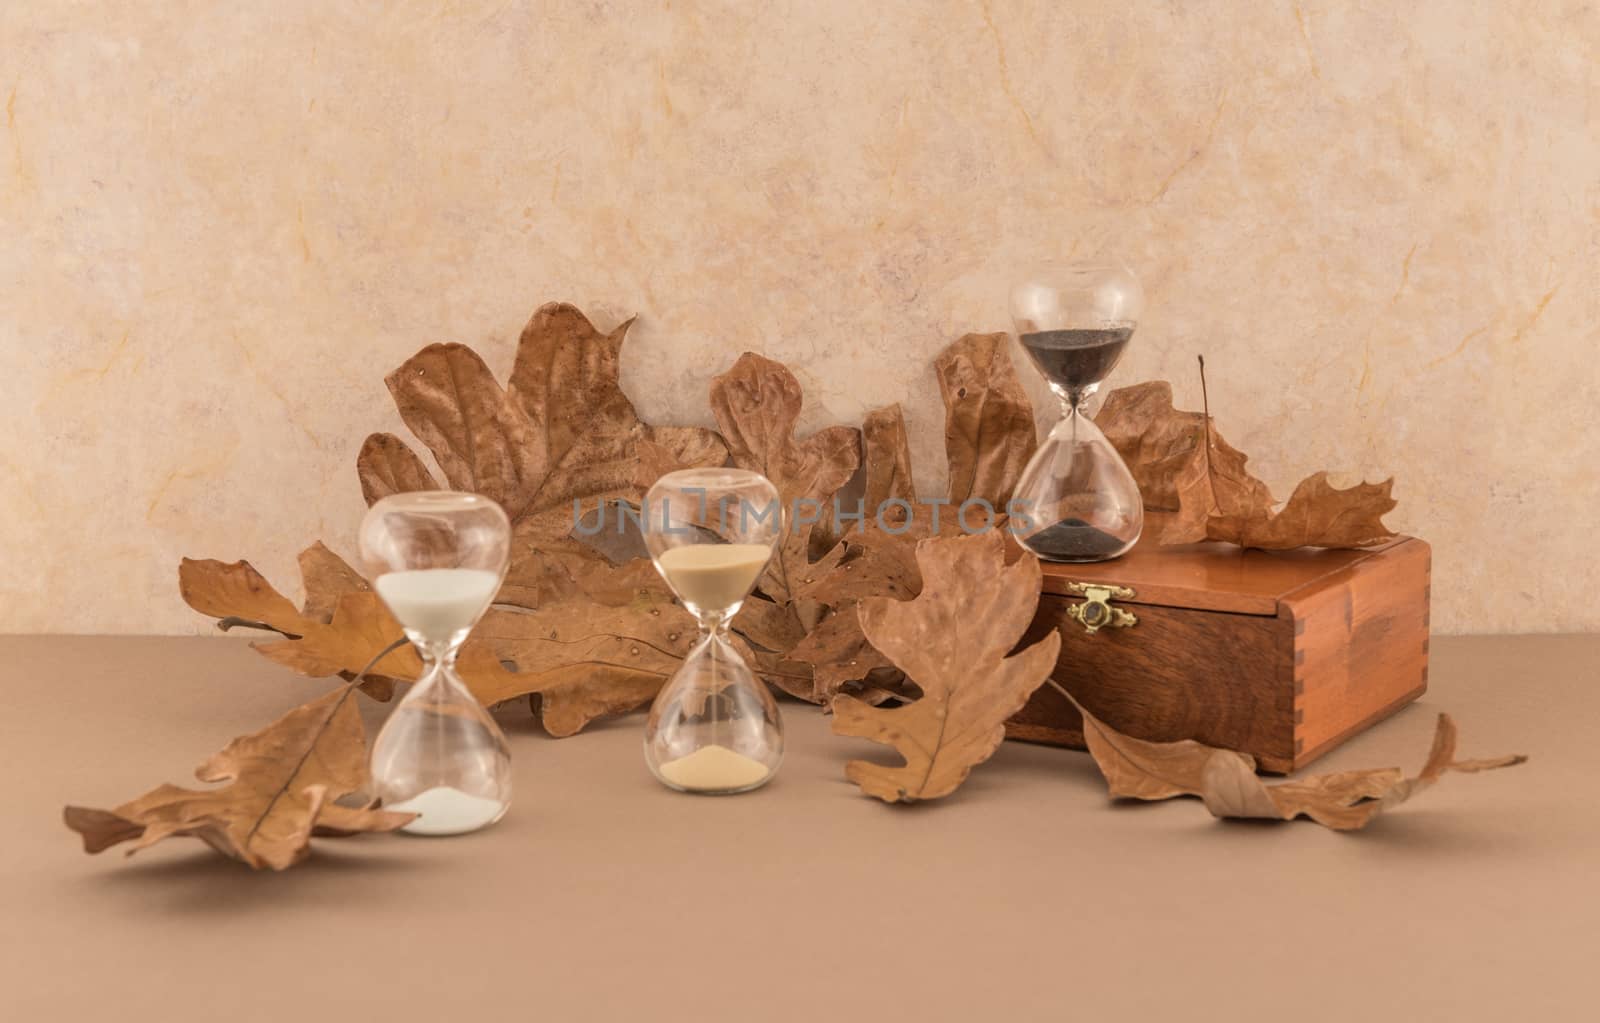 "Time" theme with hourglasses and autumn leaves